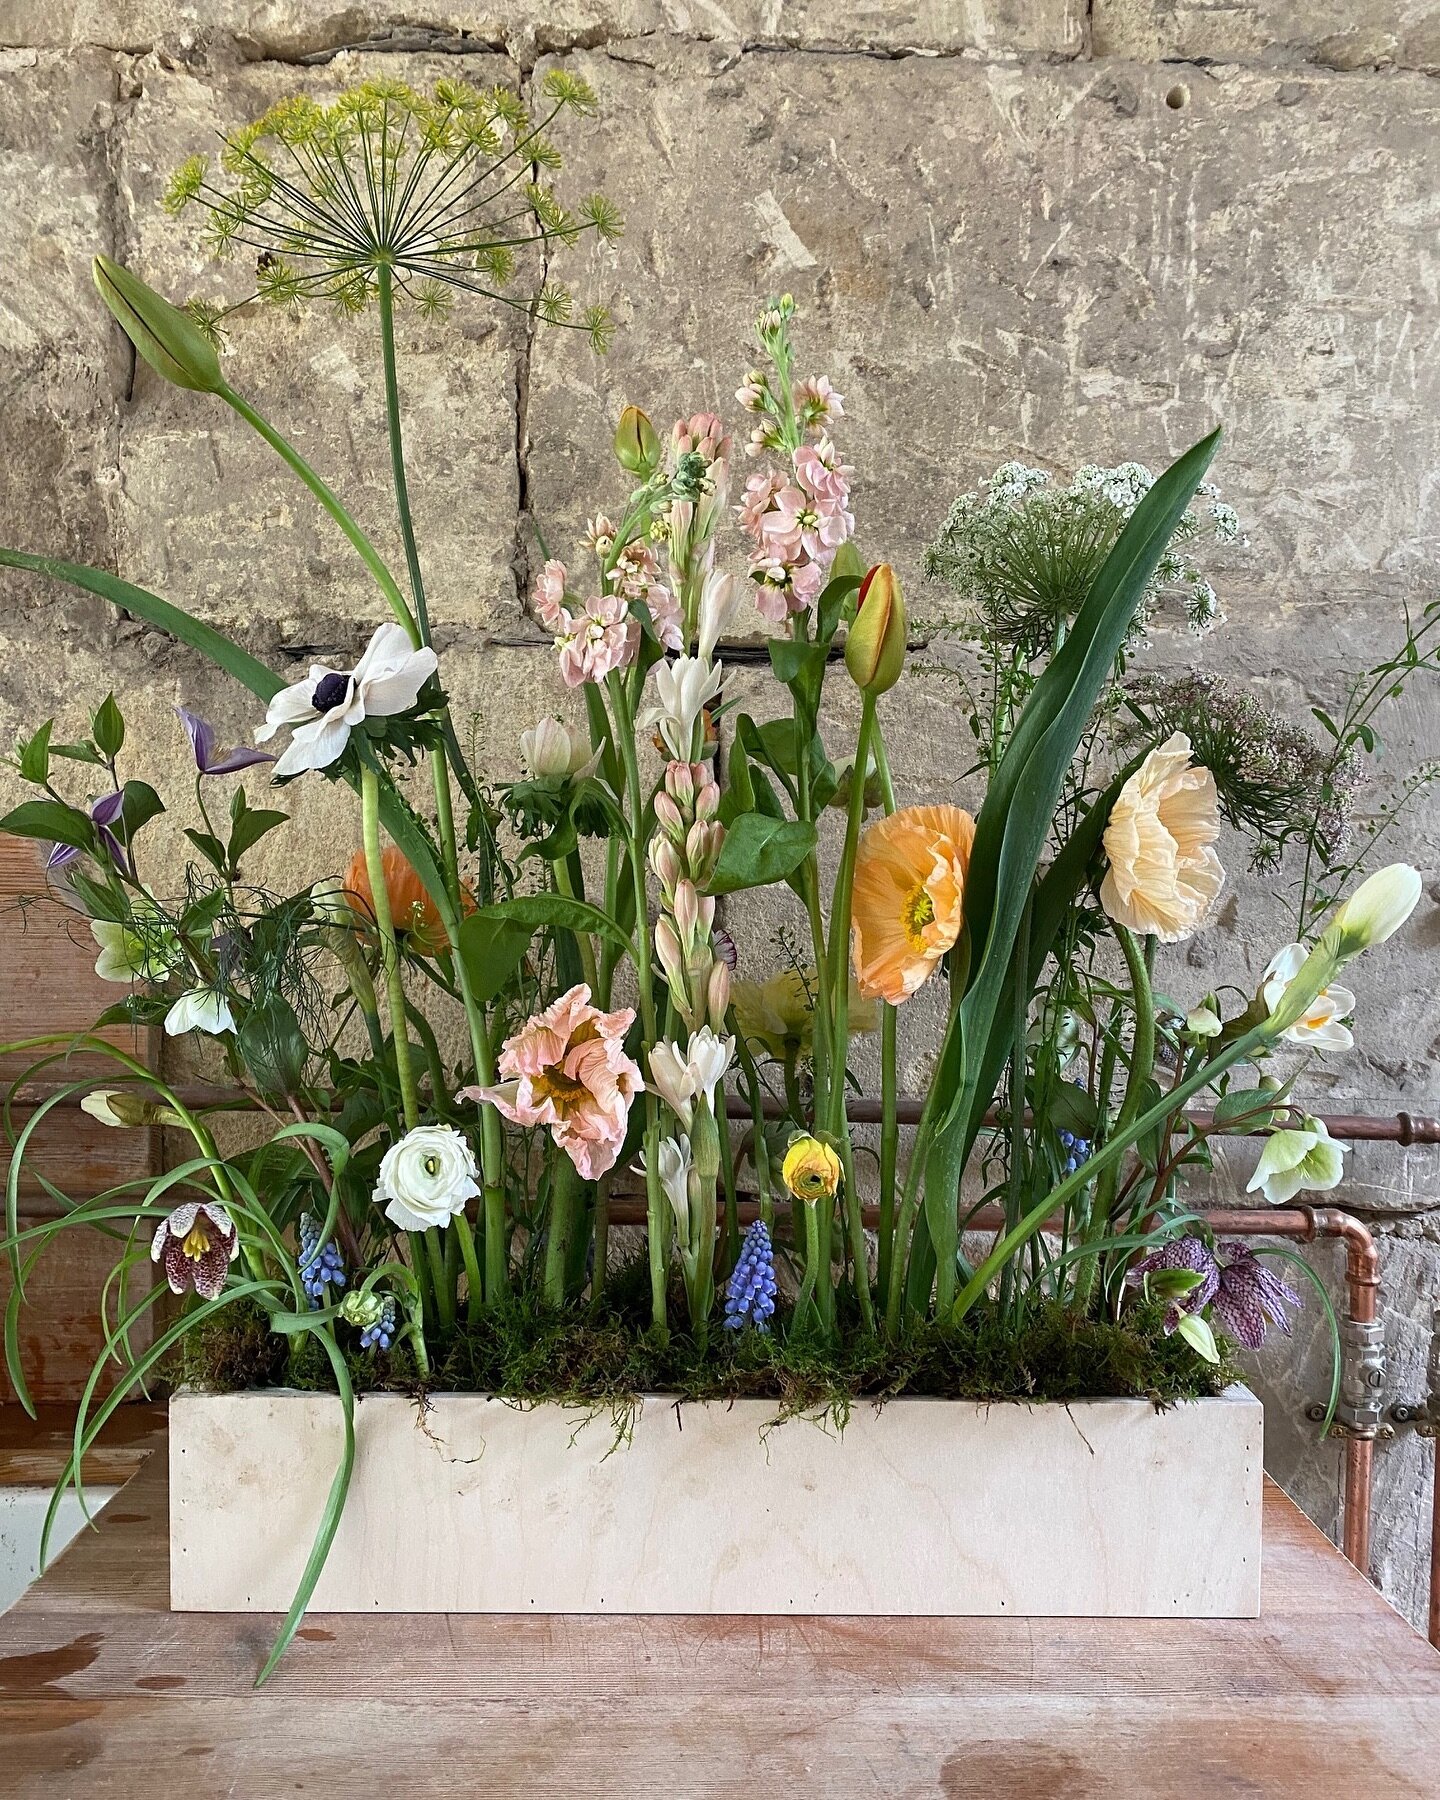 FLORISTY BASICS COURSE

This course is perfect for flower lovers who want to dip their toes into the floristry world or those who are simply wanting to learn basic sustainable methods. 3 days devoted purely to flowers. 3 days of creative playtime.

P